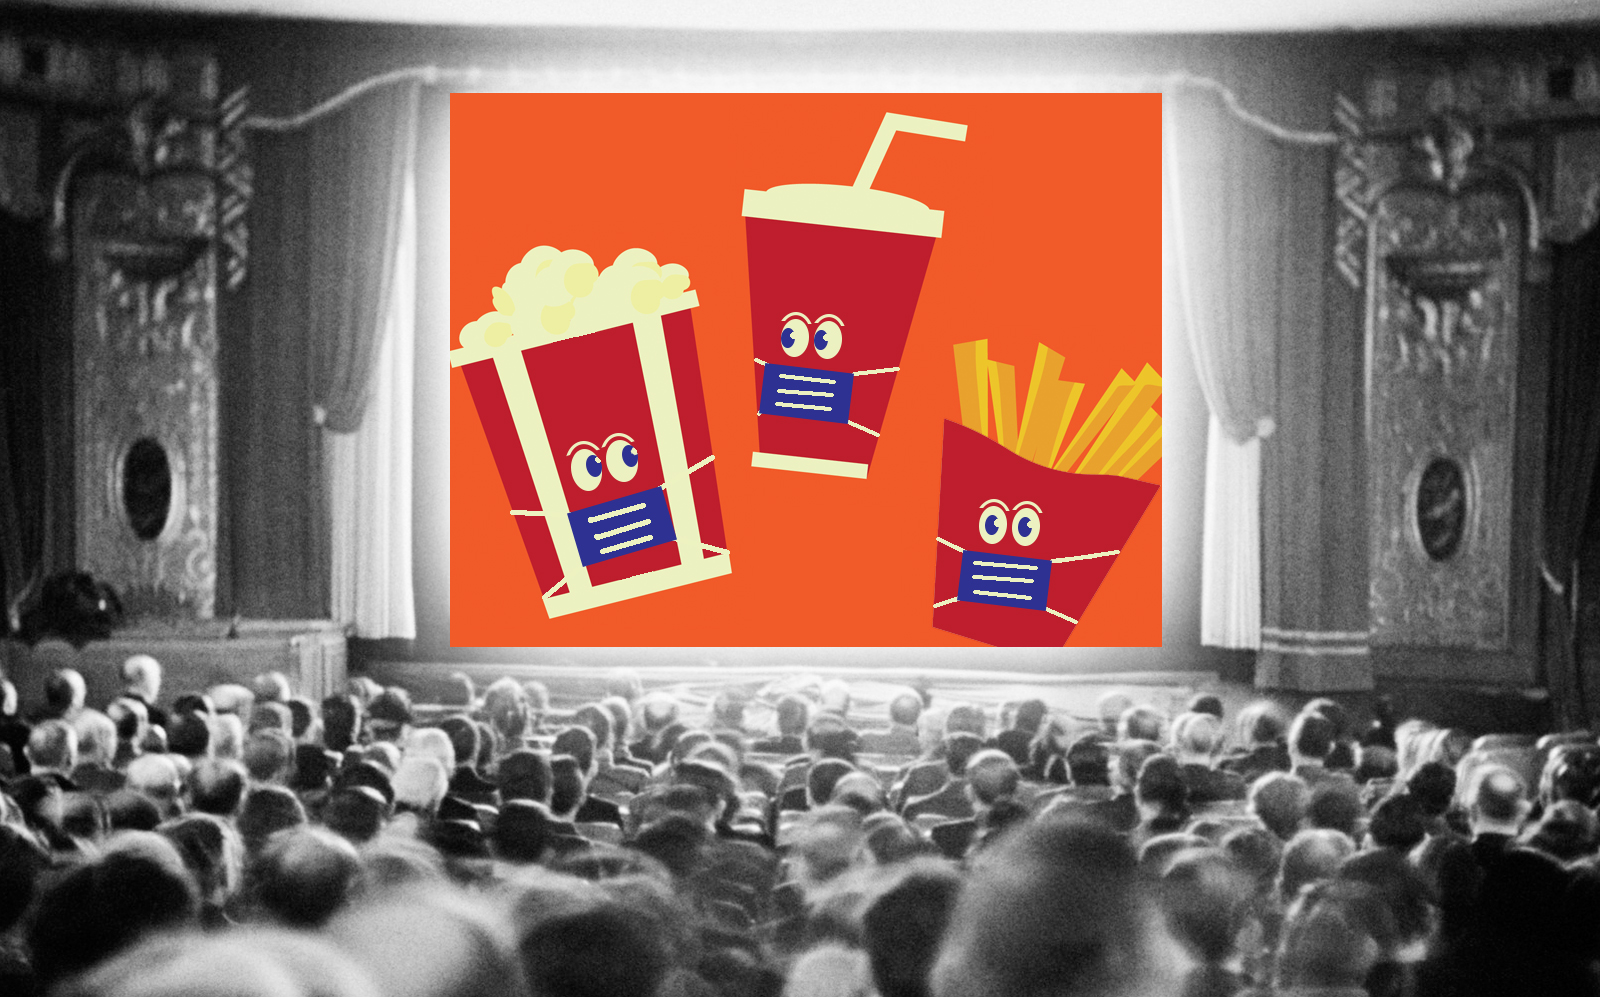 Theaters in some cities are opening with restrictions. (Getty, Photo Illustration by Alison Bushor for The Real Deal)